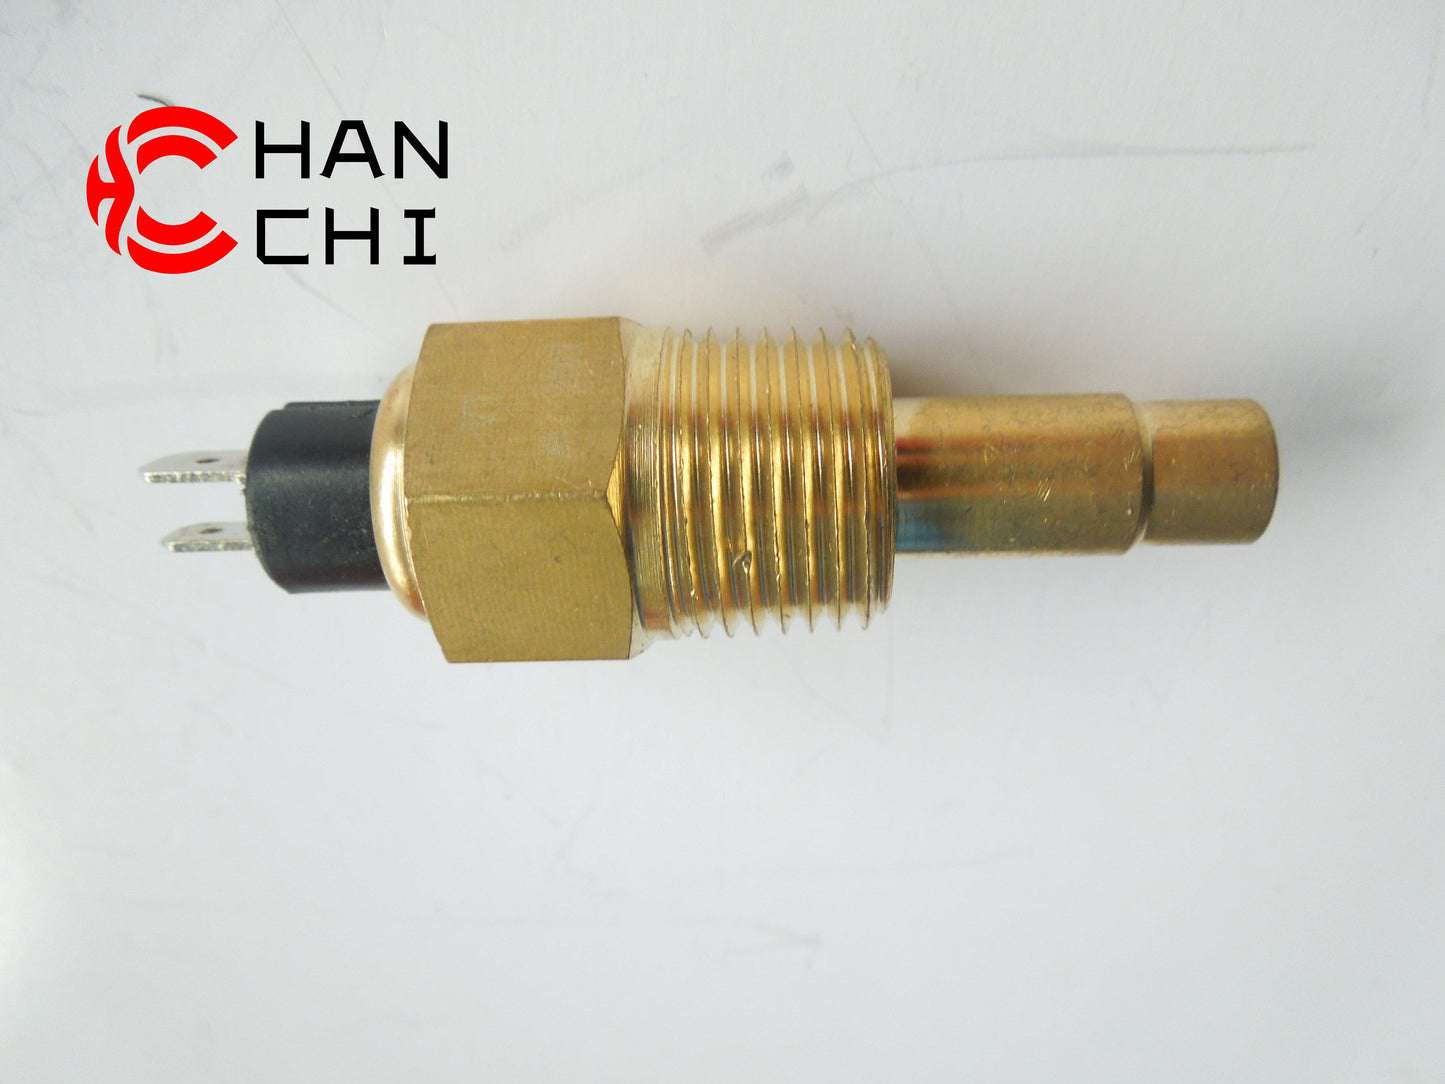 【Description】---☀Welcome to HANCHI☀---✔Good Quality✔Generally Applicability✔Competitive PriceEnjoy your shopping time↖（^ω^）↗【Features】Brand-New with High Quality for the Aftermarket.Totally mathced your need.**Stable Quality**High Precision**Easy Installation**【Specification】OEM：VT-WG201Material：metalColor：goldenOrigin：Made in ChinaWeight：100g【Packing List】1*Temperature Sensor Please Feel Free to Contact Us for a Better Service